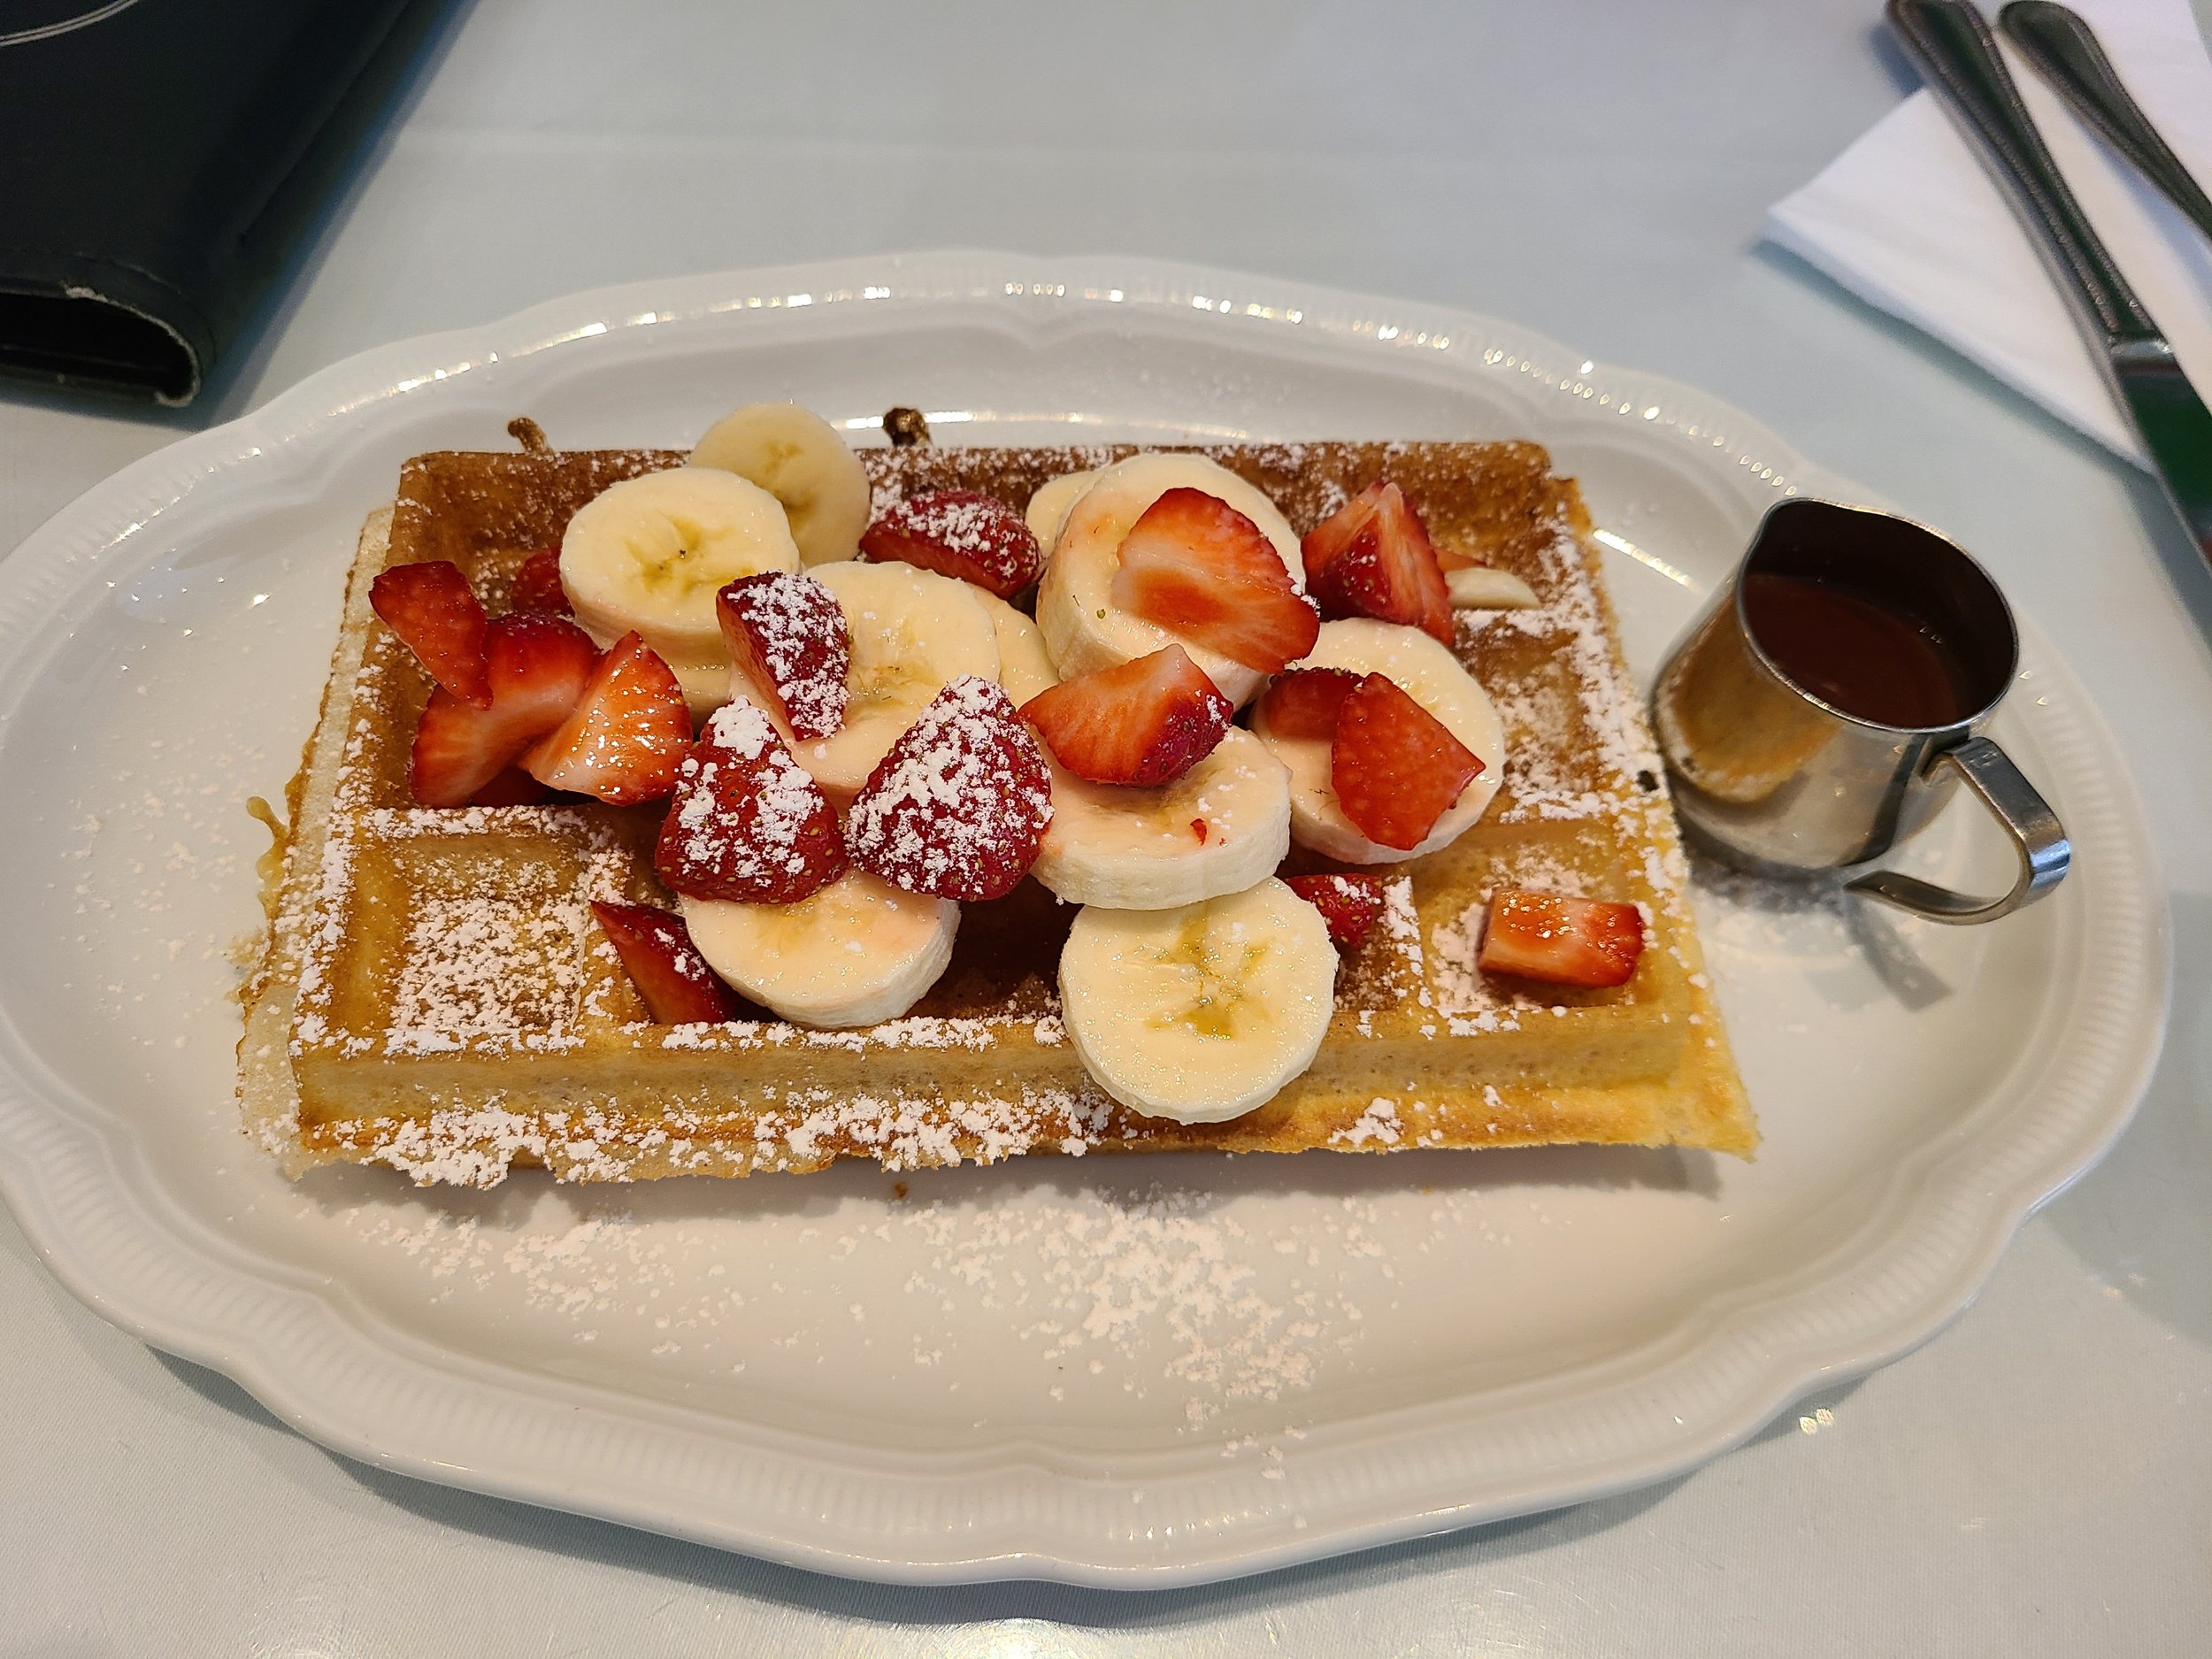  Belgian waffles with bananas, strawberries and chocolate. 